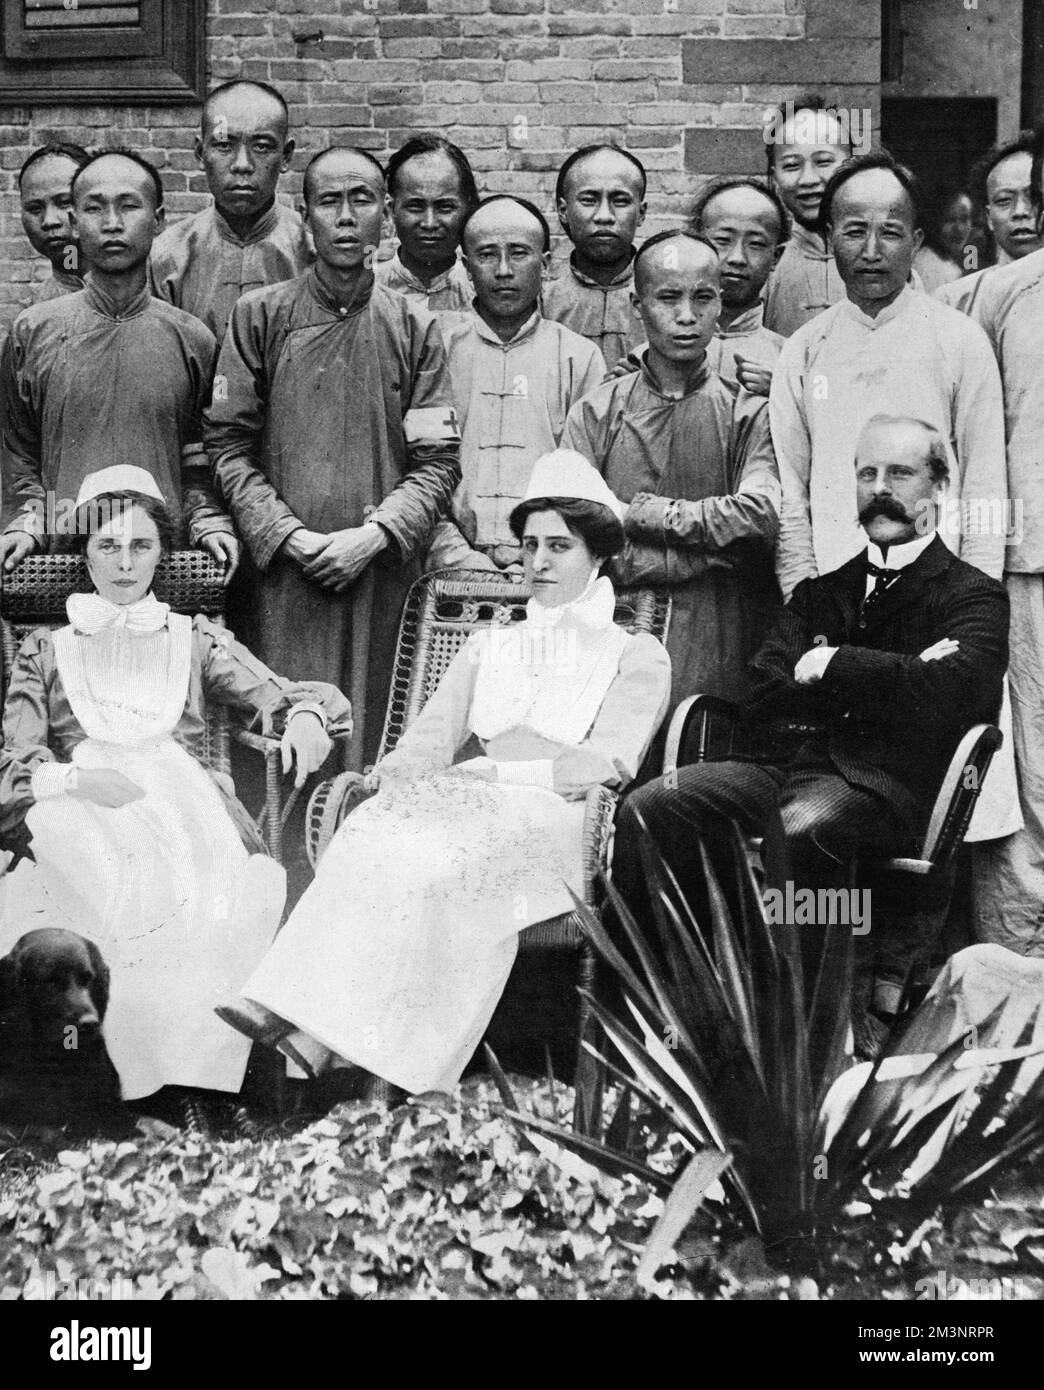 Dr. W. A. Tatchell pictured with two nurses, all from the Wesleyan Men's Hospital in Hankow, who rescued wounded and blinded inmates from the hospital under fire from insurgents during the Chinese Revolution of 1911. Dr. Tatchell was in China with Dr. Robert T. Booth and wrote a book about Dr. Booth entitled 'Booth of Hankow'        Date: 1911 Stock Photo